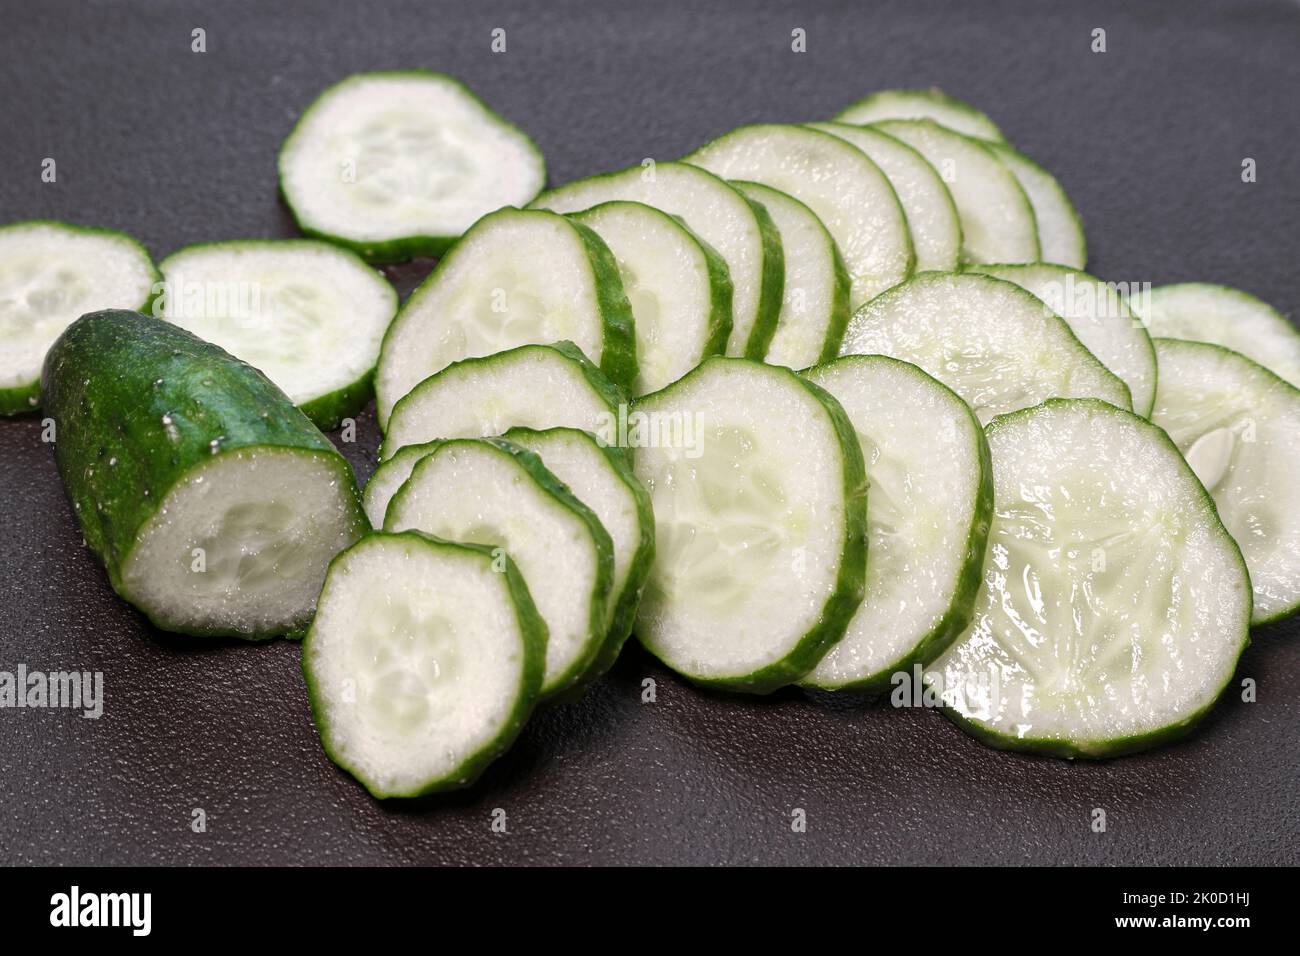 Sliced fresh cucumber for salad on a cutting board. Healthy vegetarian food. Ripe vegetables. Stock Photo